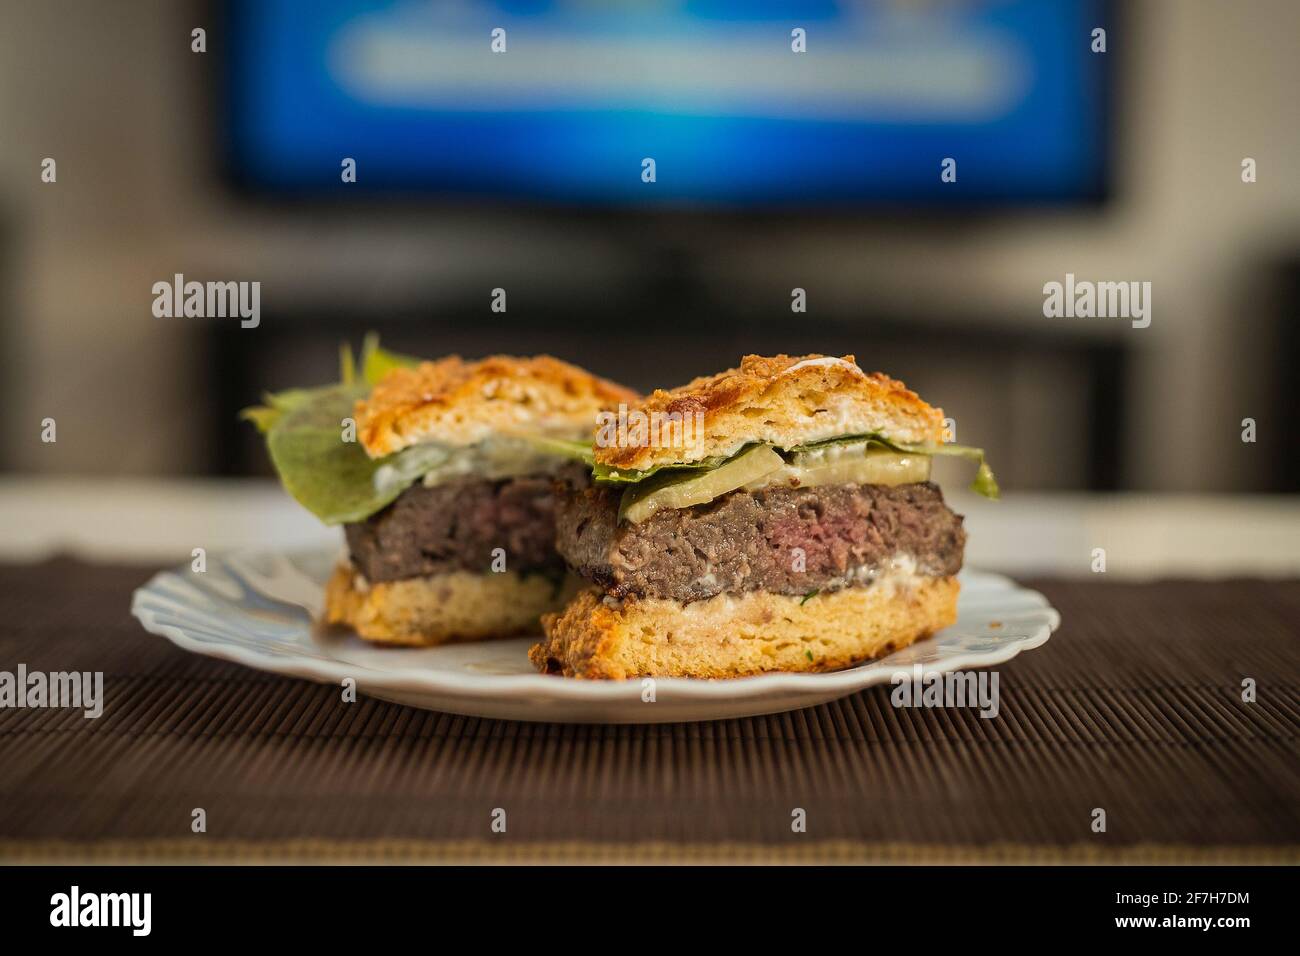 LCHF Low carbohydrate high fat burger or hamburger meal. LCHF burger with non carbohydrate bread made of sesame, eggs, chees, almonds. Concept picture Stock Photo